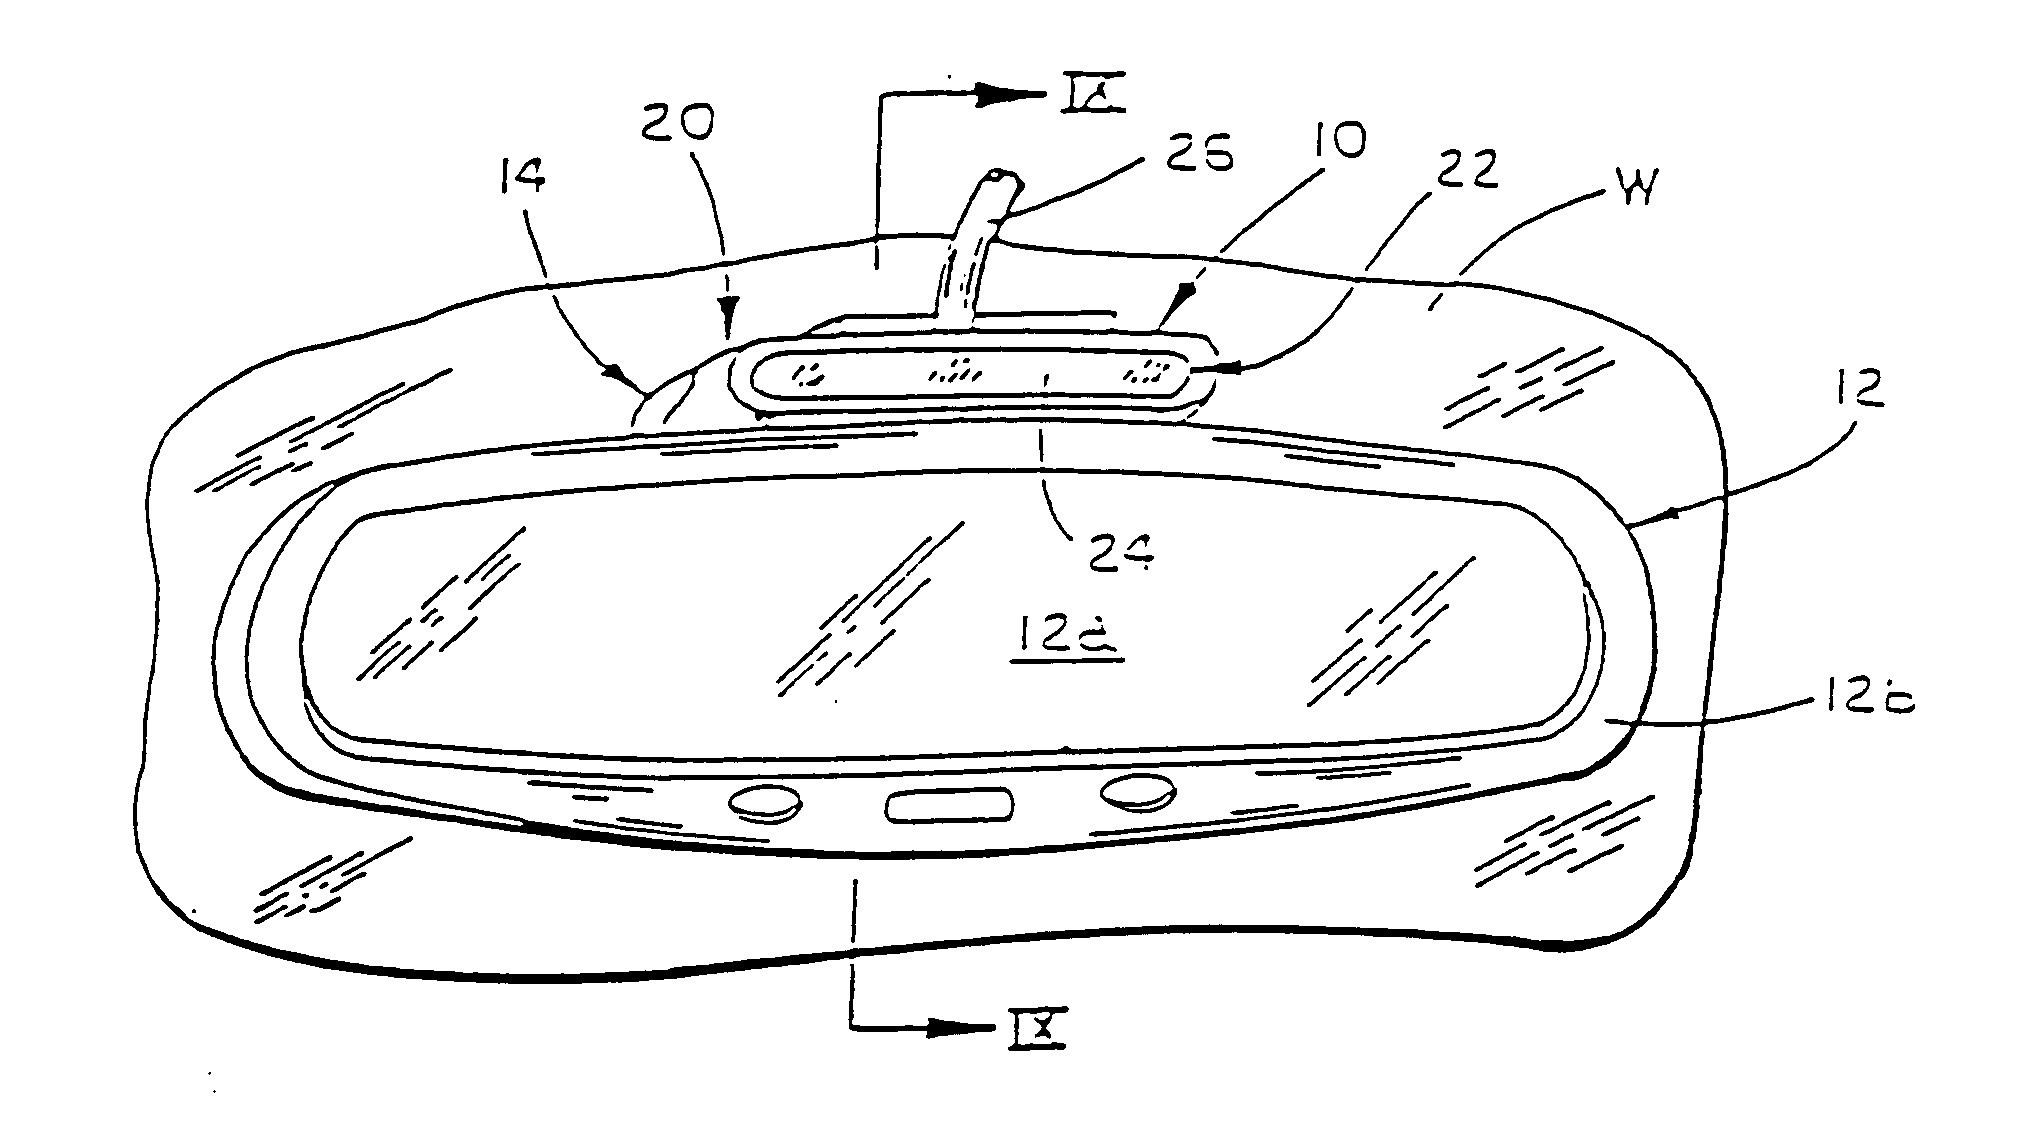 Rearview mirror assembly incorporating accessories